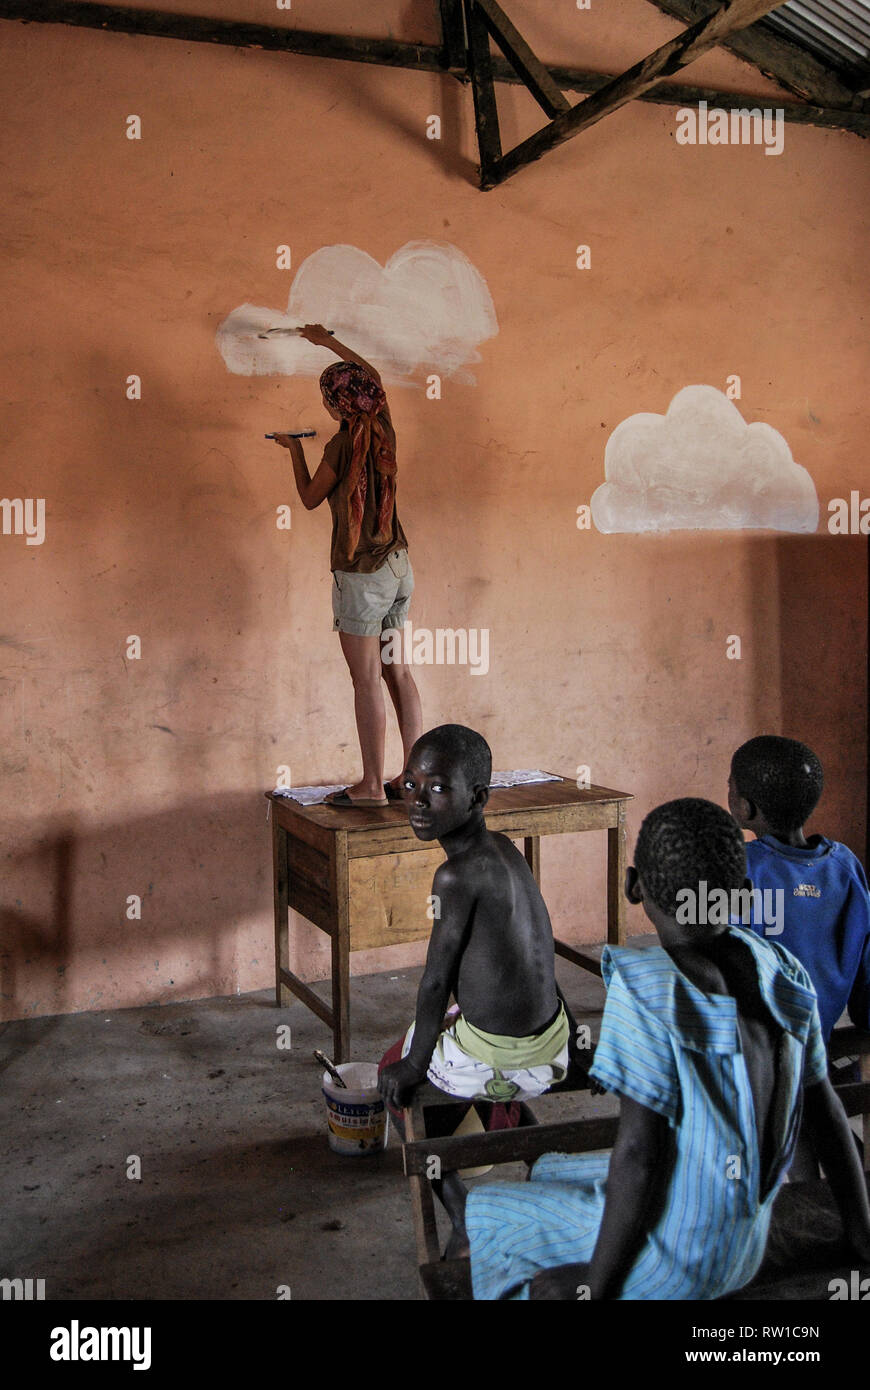 A photo of a woman painting white clouds on a wall of a local elementary school in Ghana, Africa. Students are sitting nearby and watching. Stock Photo